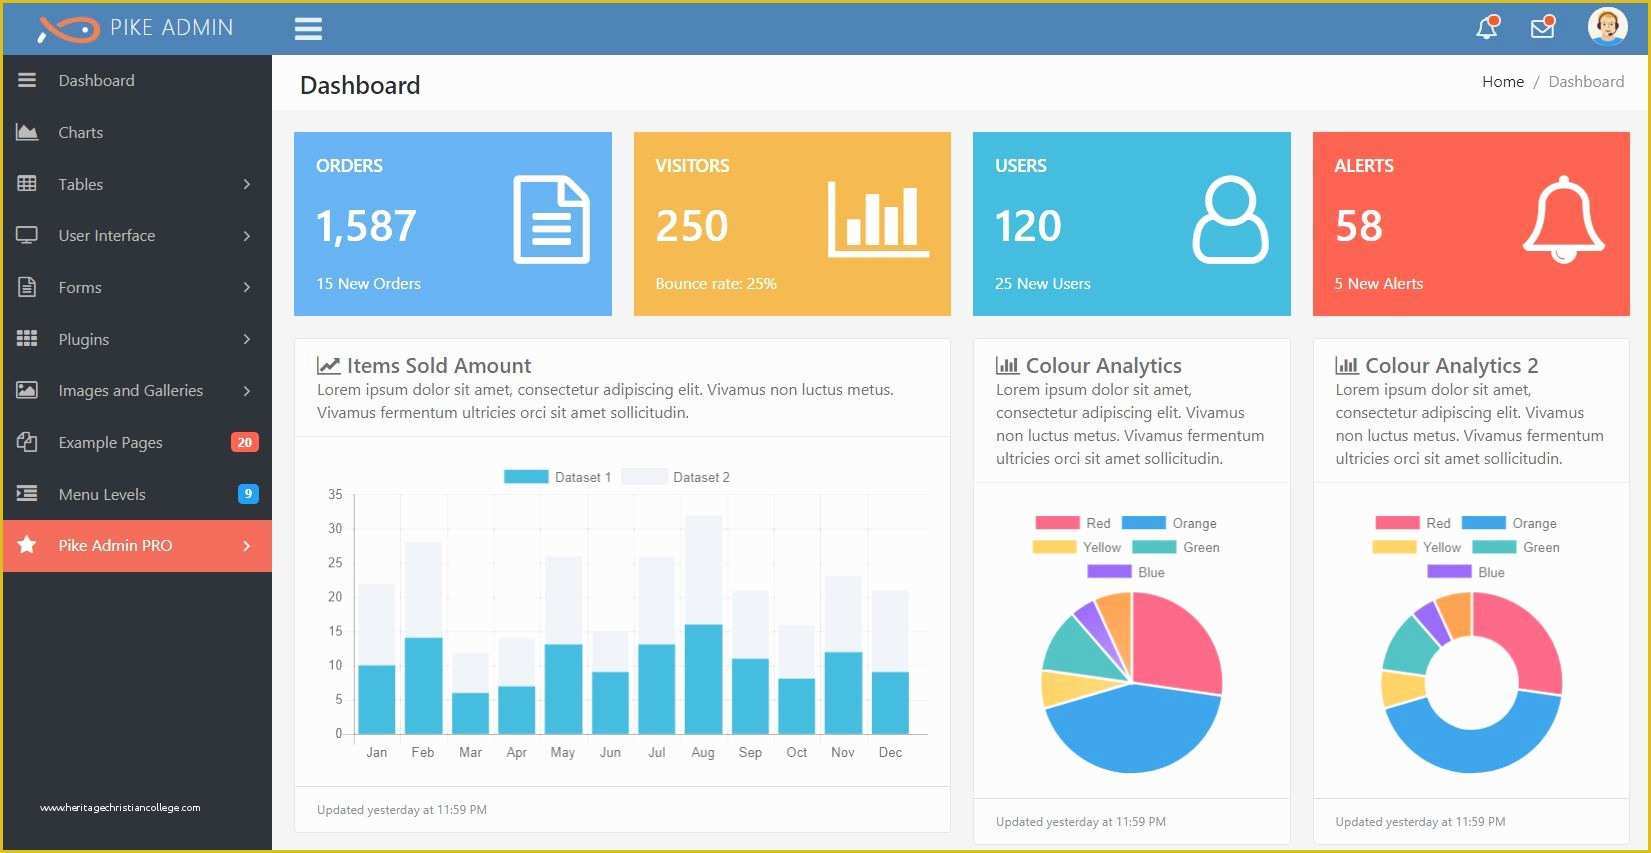 Bootstrap 4 Dashboard Template Free Of Pike Admin Pro Bootstrap 4 Admin and Front End Template